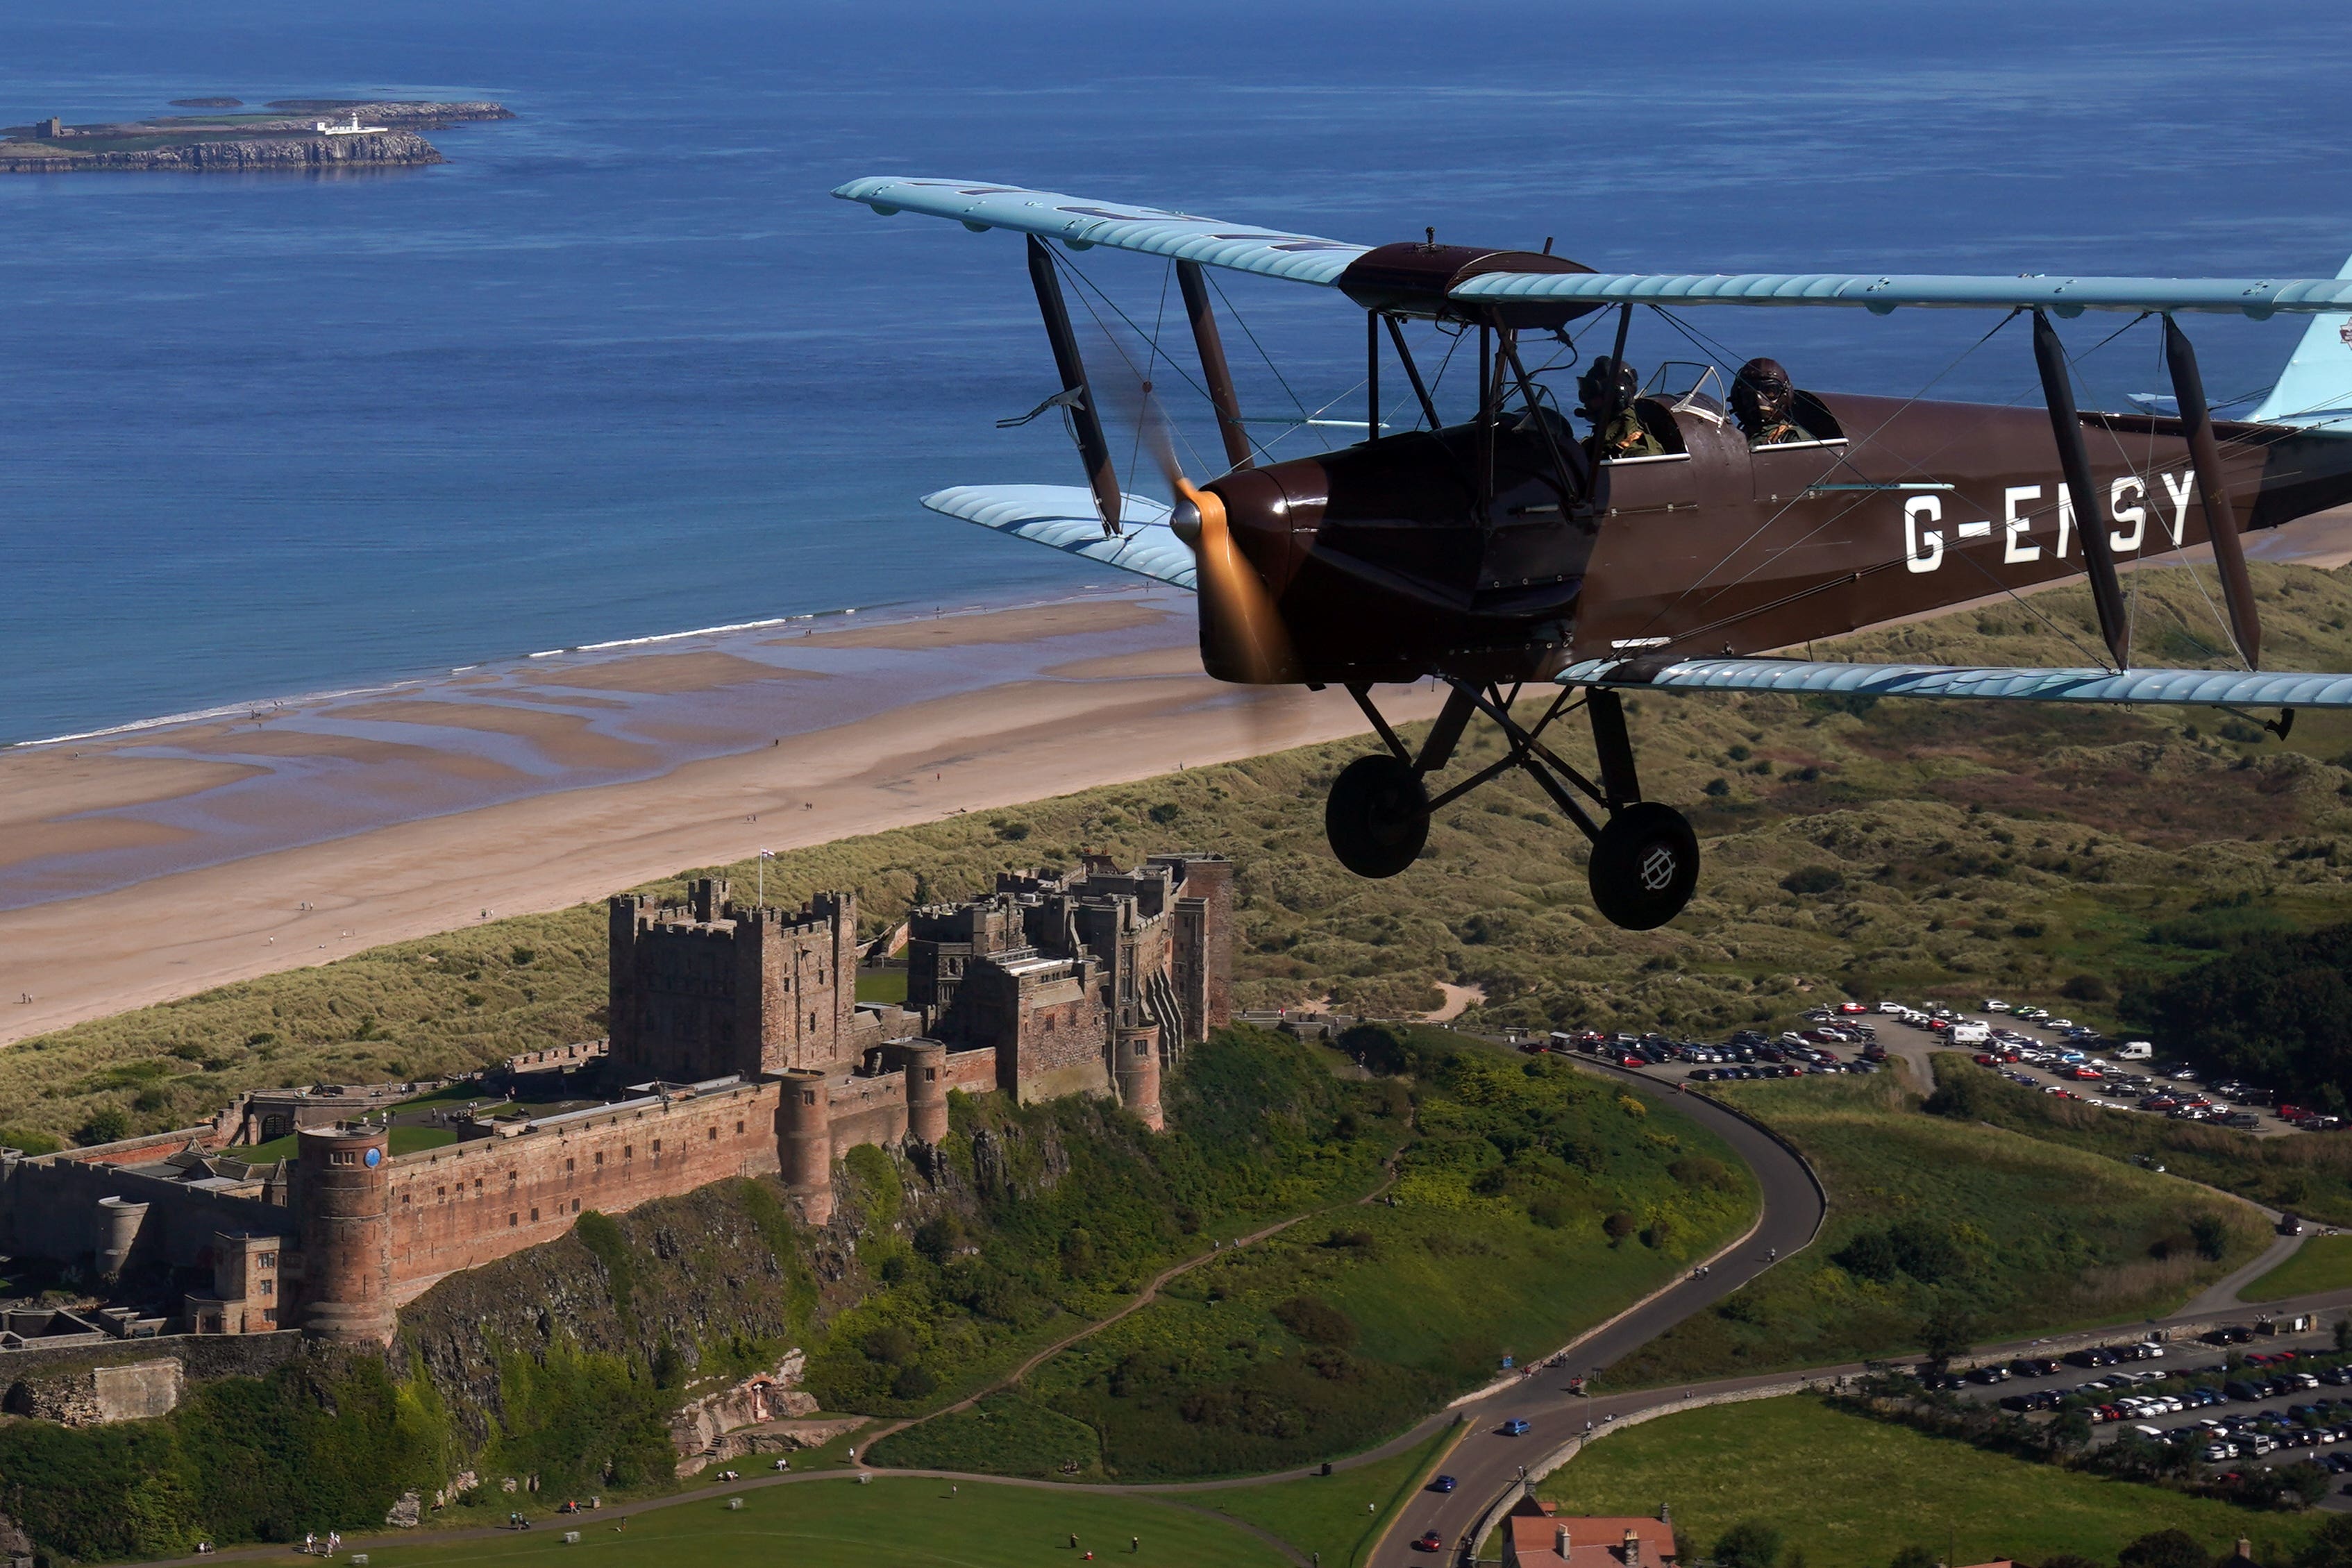 The Second World War vintage Tiger Moth plane takes to the sky over Bamburgh Castle in Northumberland (Owen Humphreys/PA)